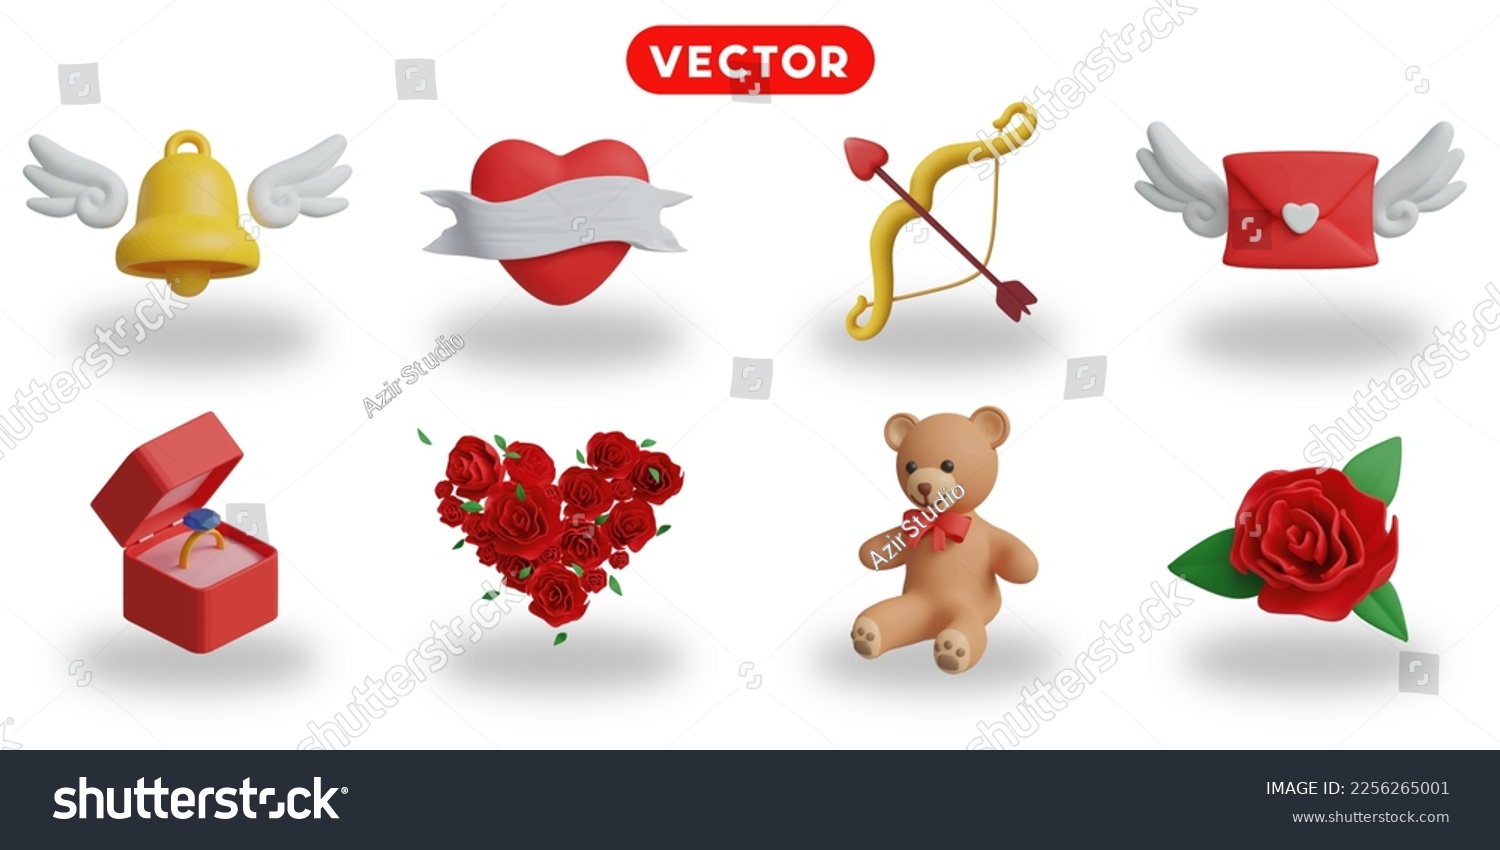 SVG of 3d rendering. Valentine's Day icons set on a white background winged bell, heart tag,  bow, winged letter, wedding ring box, heart-shaped bouquet, teddy bear, rose. svg